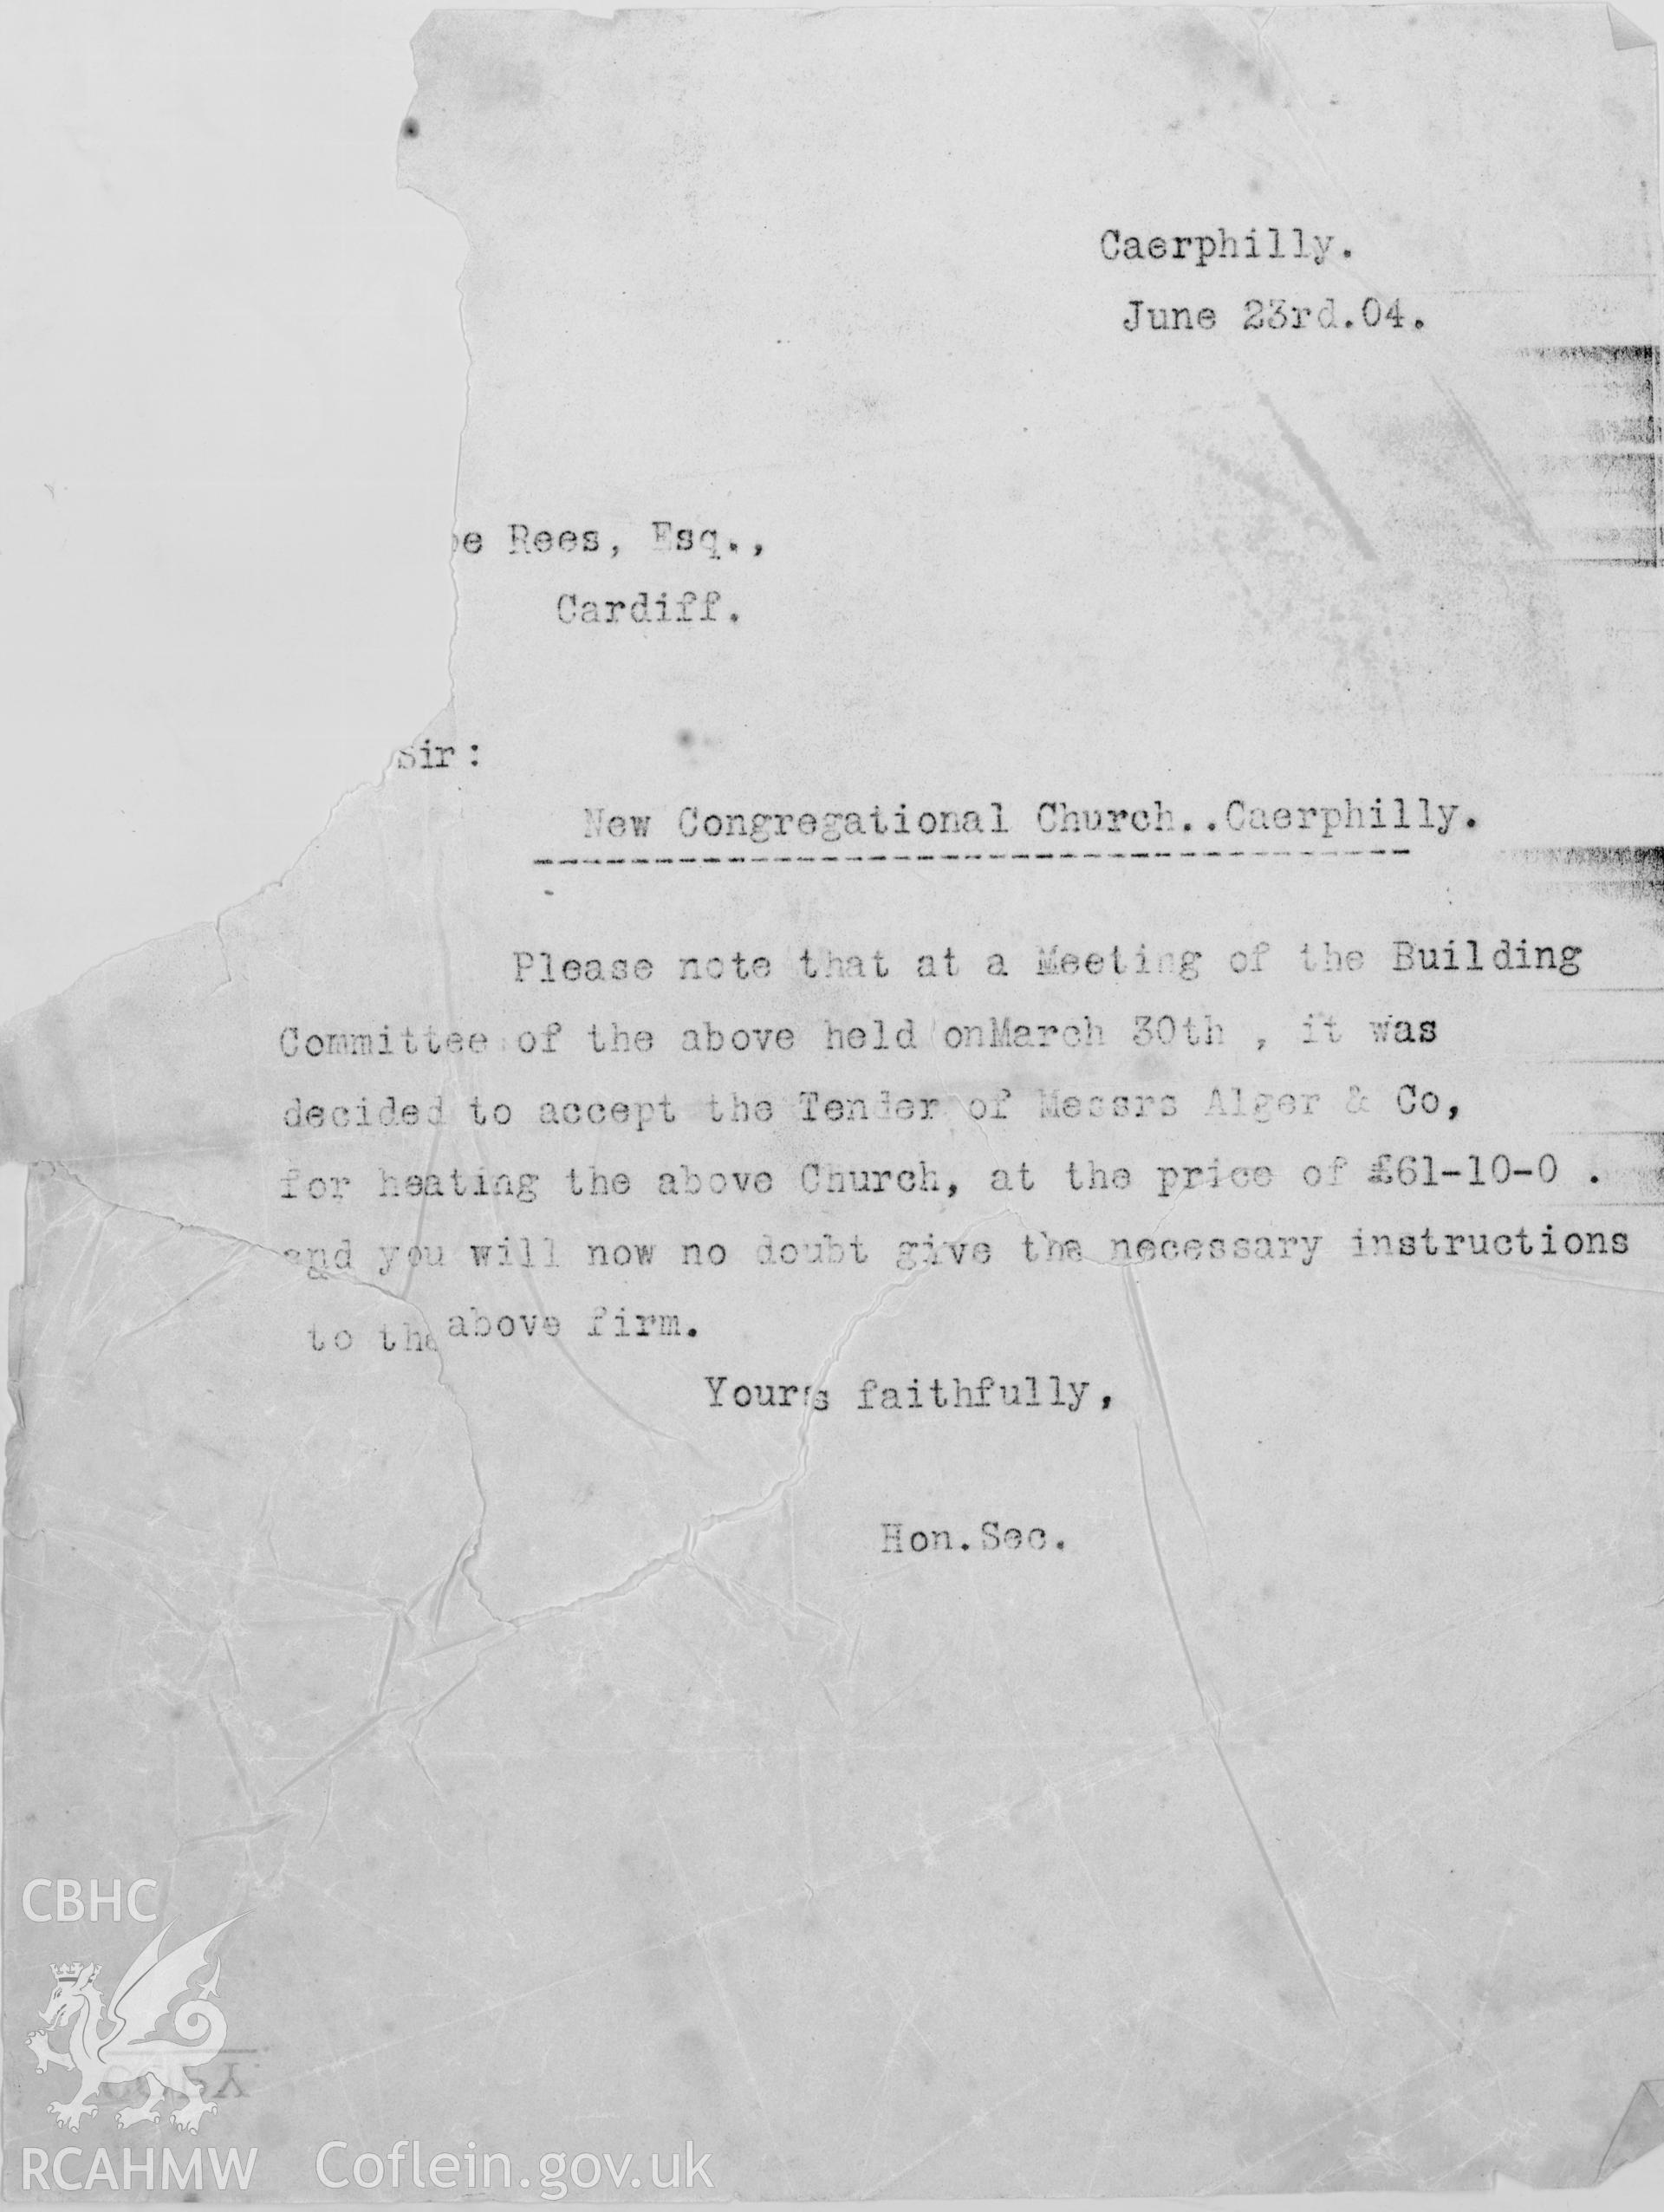 Digital scan of a letter from the Congregational Church committee to W. Beddoe Rees, Esq. The letter informs the recipient that the committee have accepted the tender of Messrs Alger & Co for the heating of the new church.